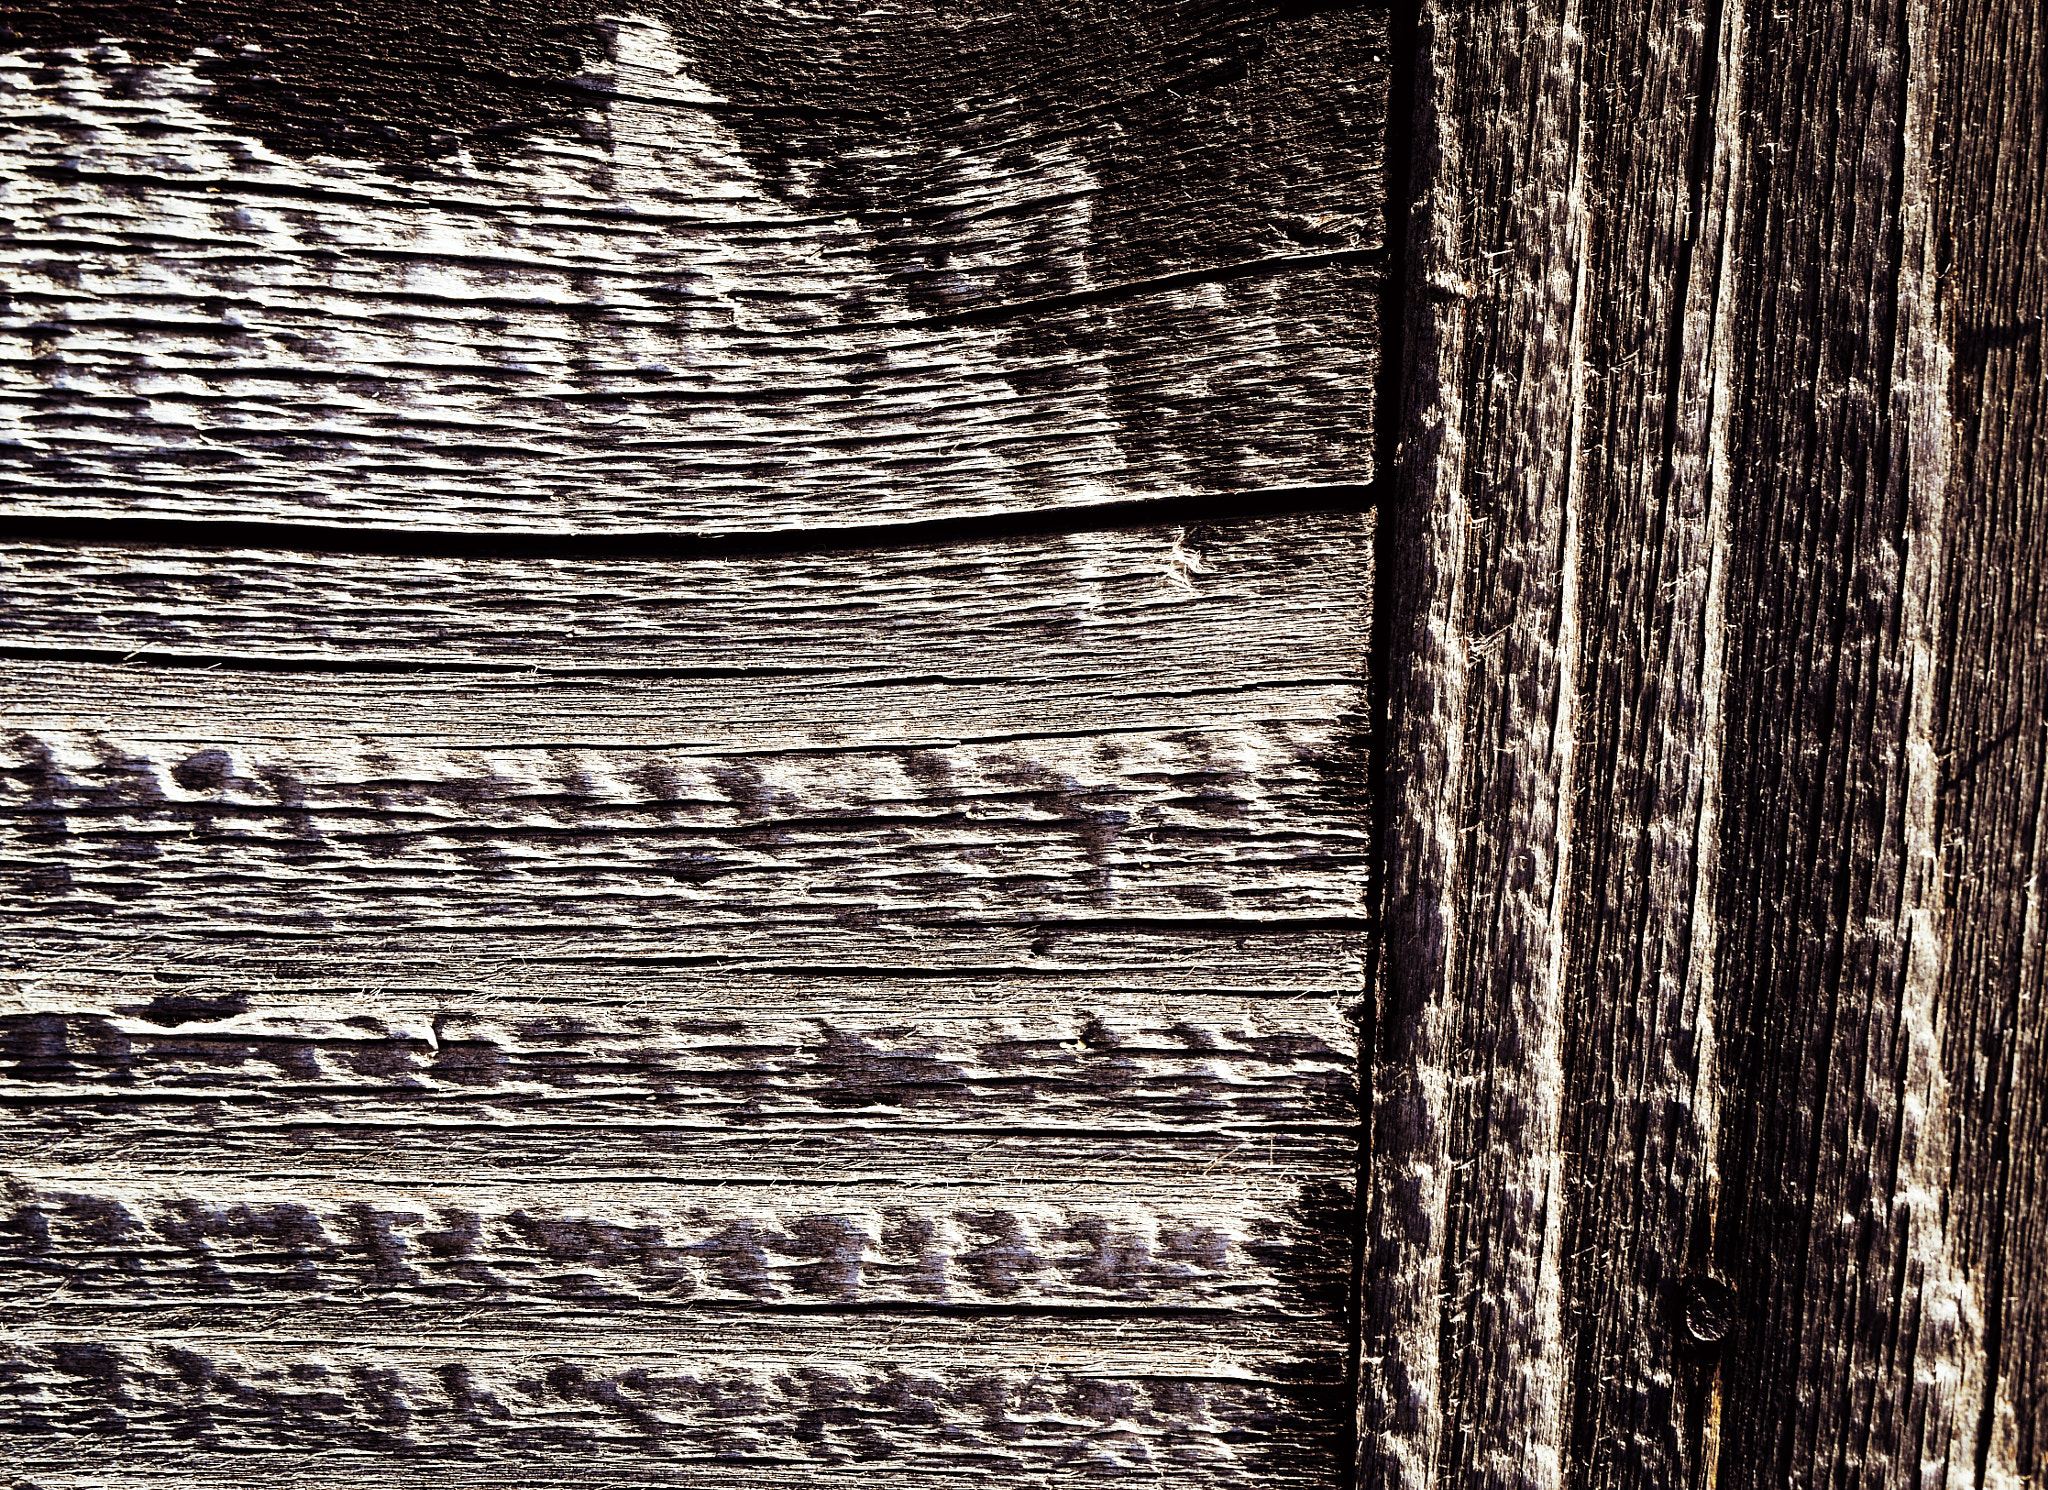 Nikon D5500 + Tamron SP 90mm F2.8 Di VC USD 1:1 Macro (F004) sample photo. Detail the structure of the old wood photography